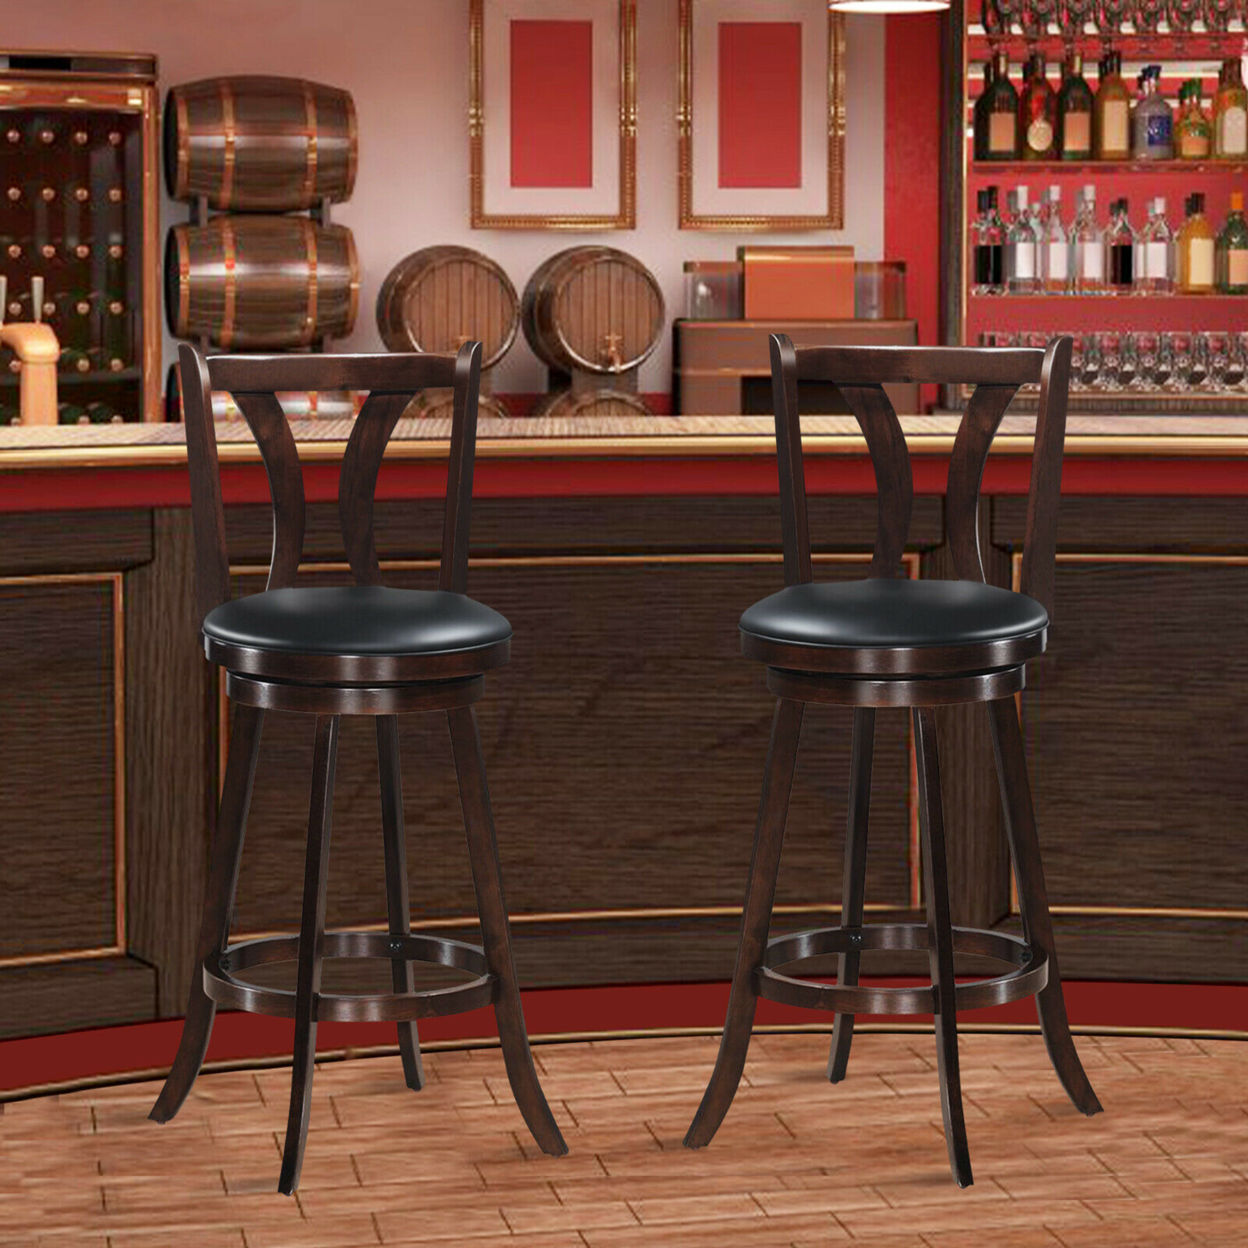 Set Of 2 Swivel Bar Stools 29.5 Bar Height Chairs With Rubber Wood Legs